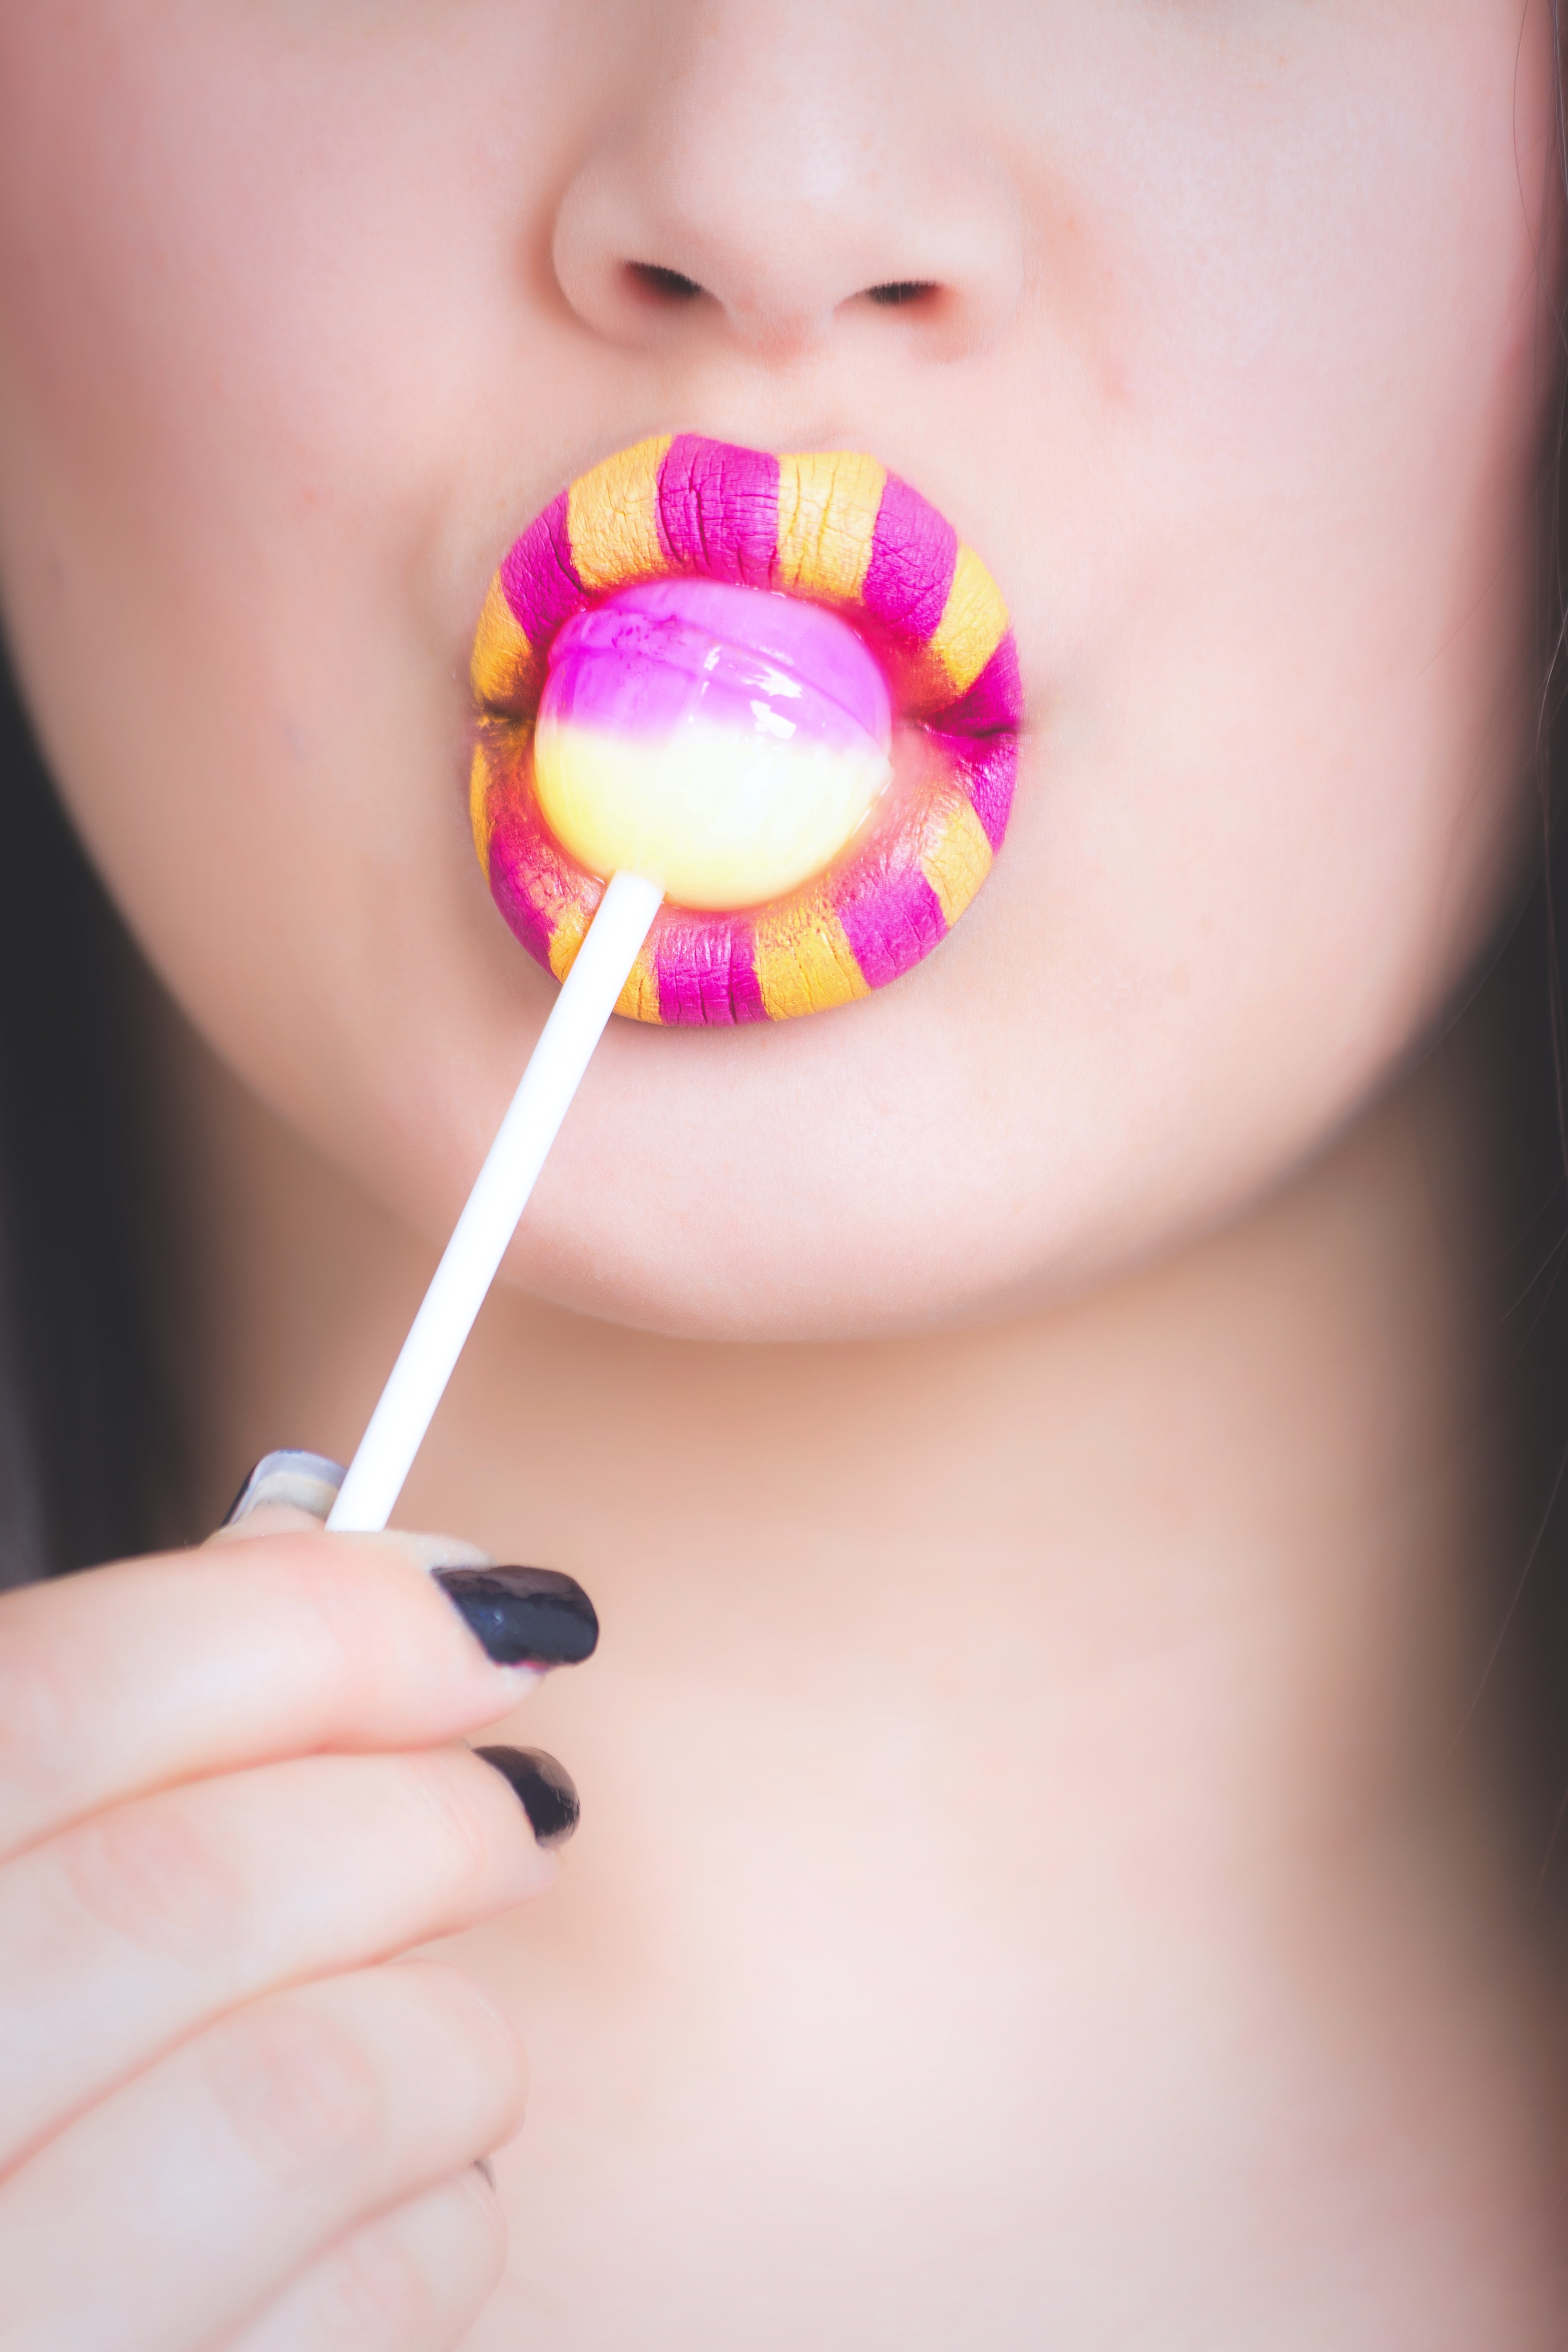 Woman licking pink and white lollipop photo